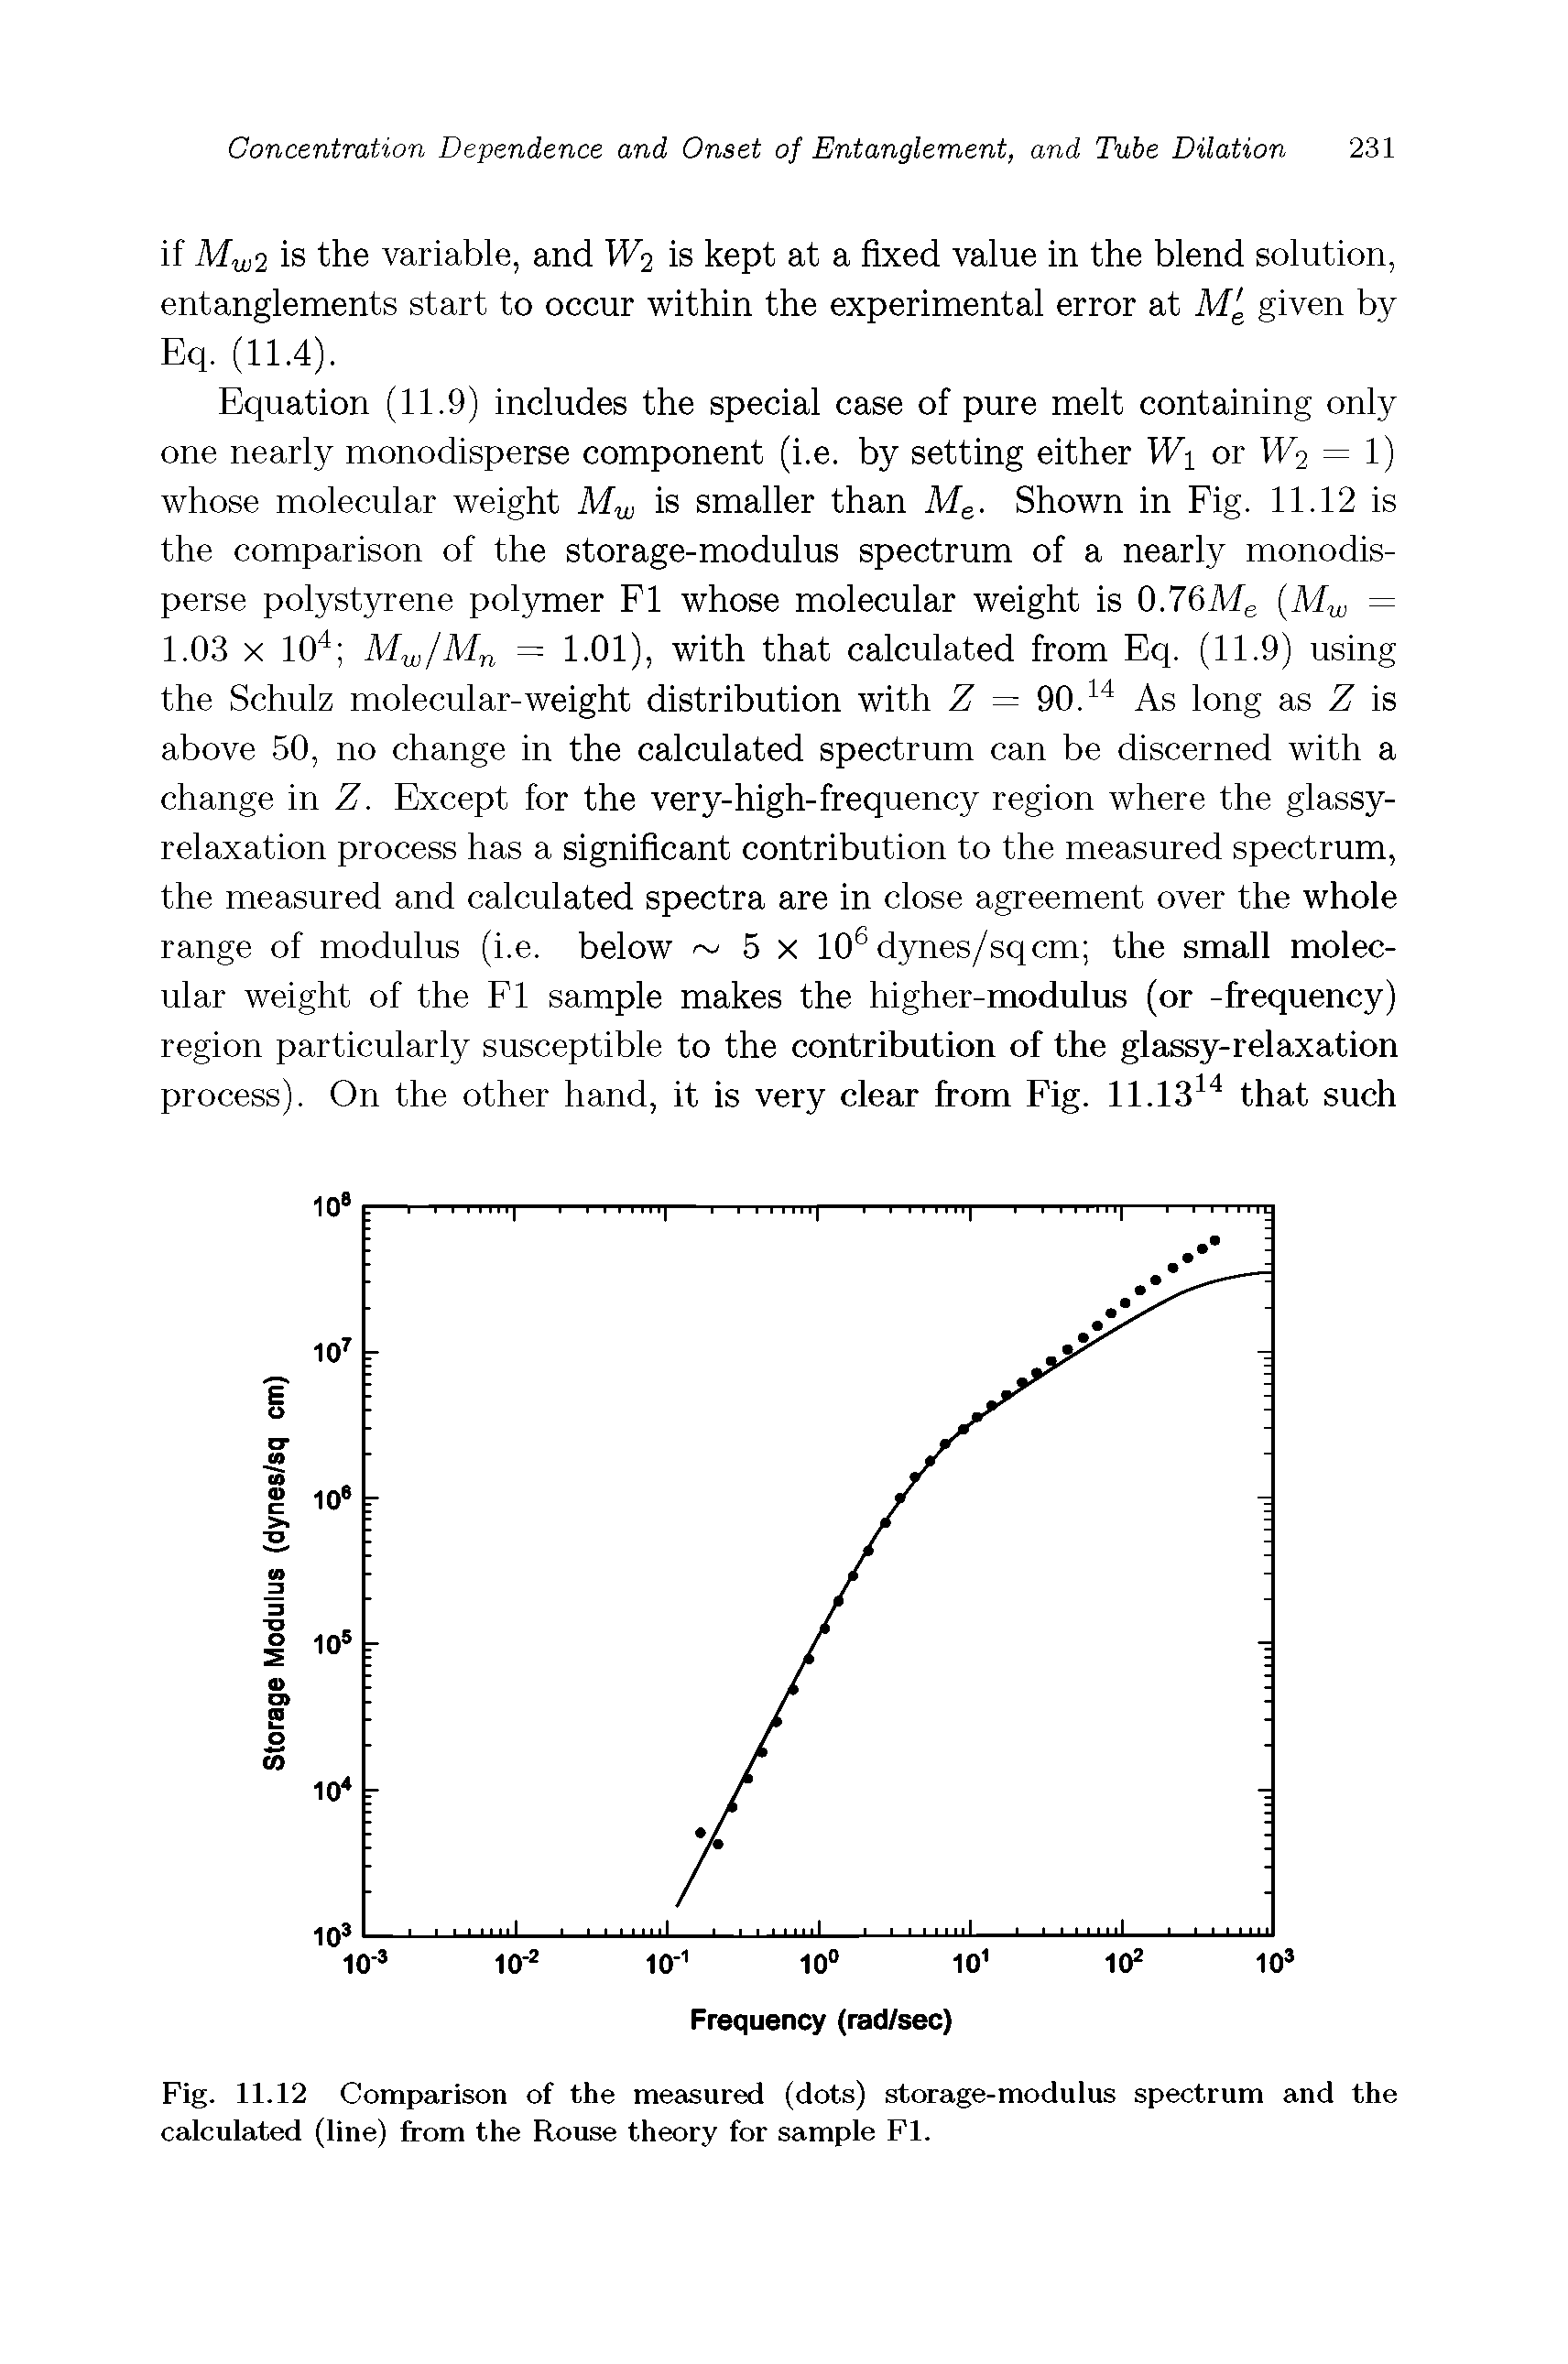 Fig. 11.12 Comparison of the measured (dots) storage-modulus spectrum and the calculated (line) from the Rouse theory for sample FI.